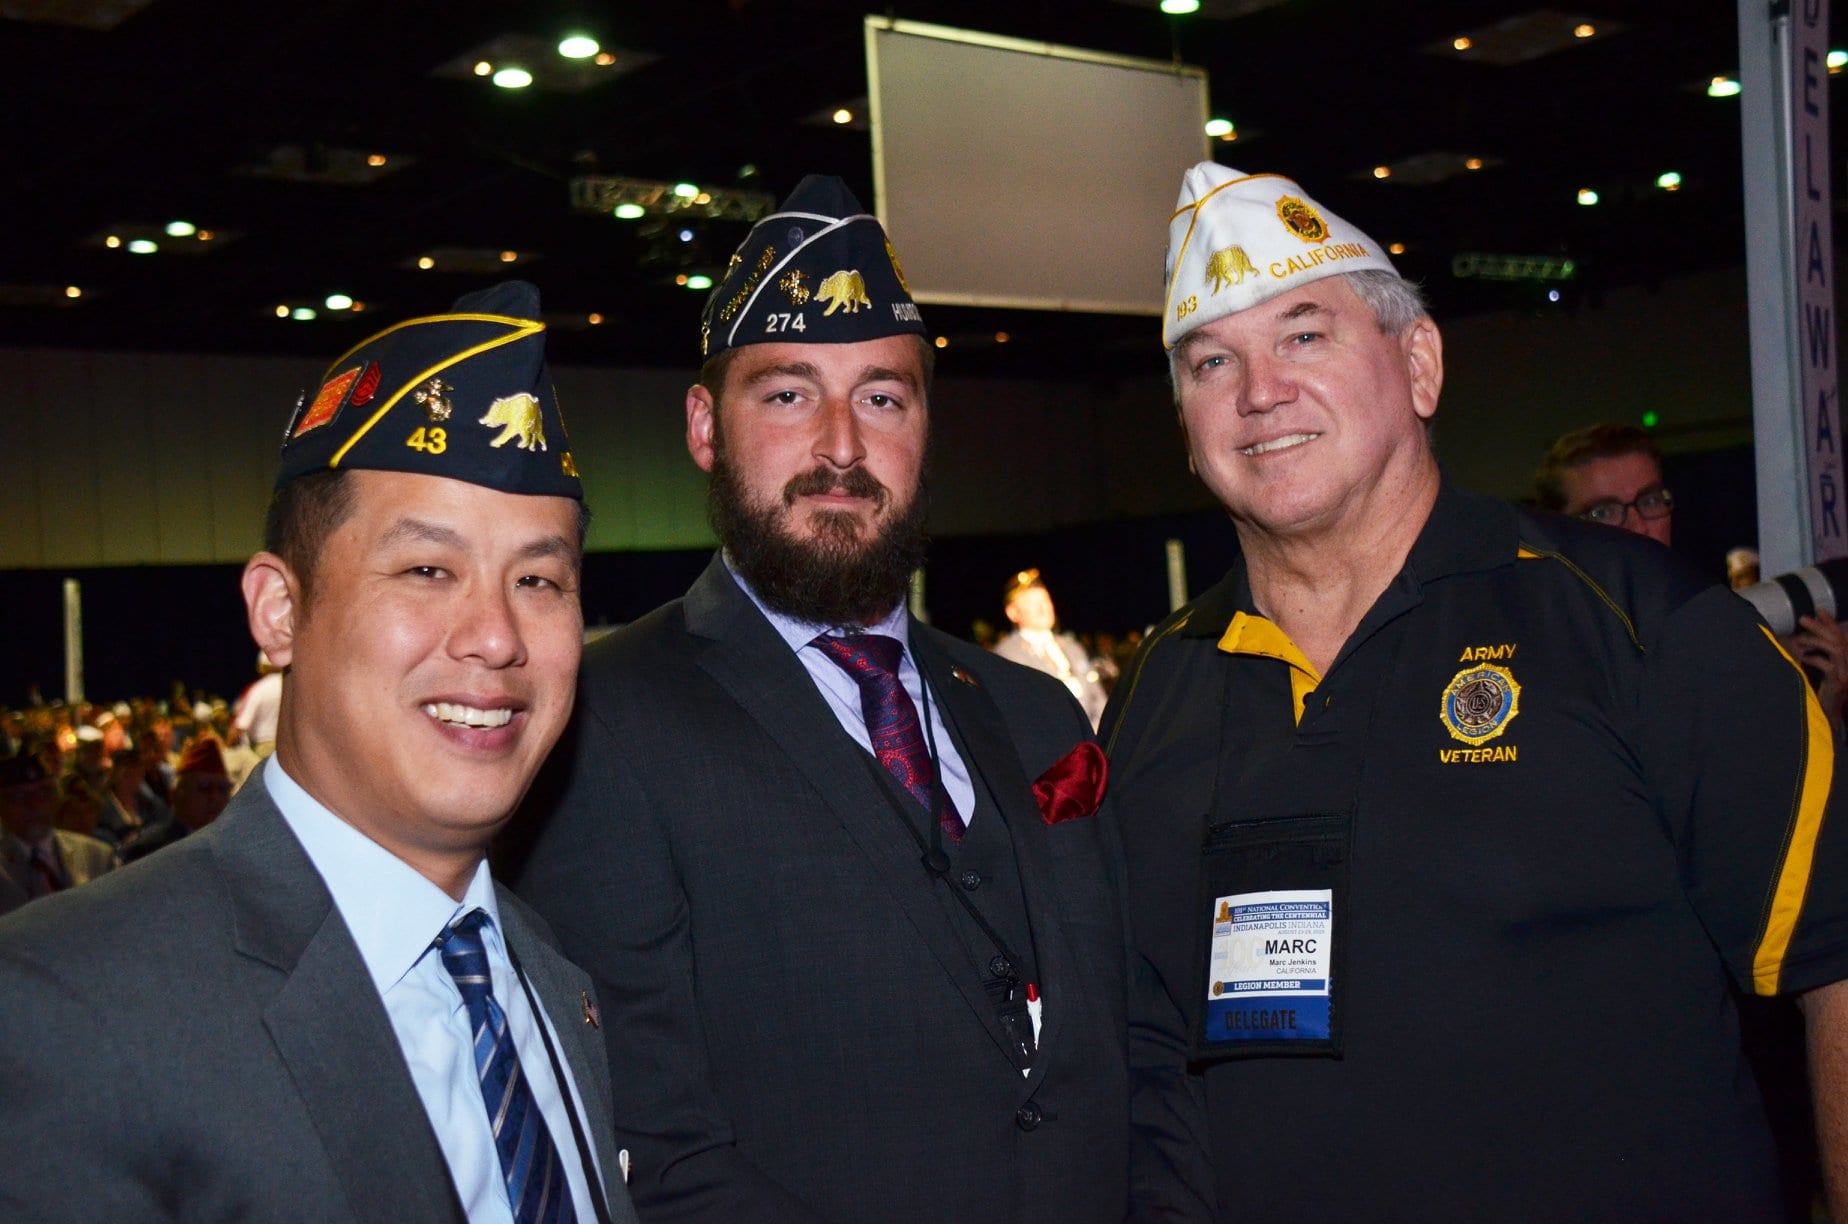 From left: Hollywood Post 43 member and National Director of Veterans Affairs & Rehabilitation Chanin Nuntavong, Humbolt County Commander Jeffrey Sterling and California Department Service Officer Marc Jenkins pause for a photo during The American Legion's 101st annual convention in August 2019.